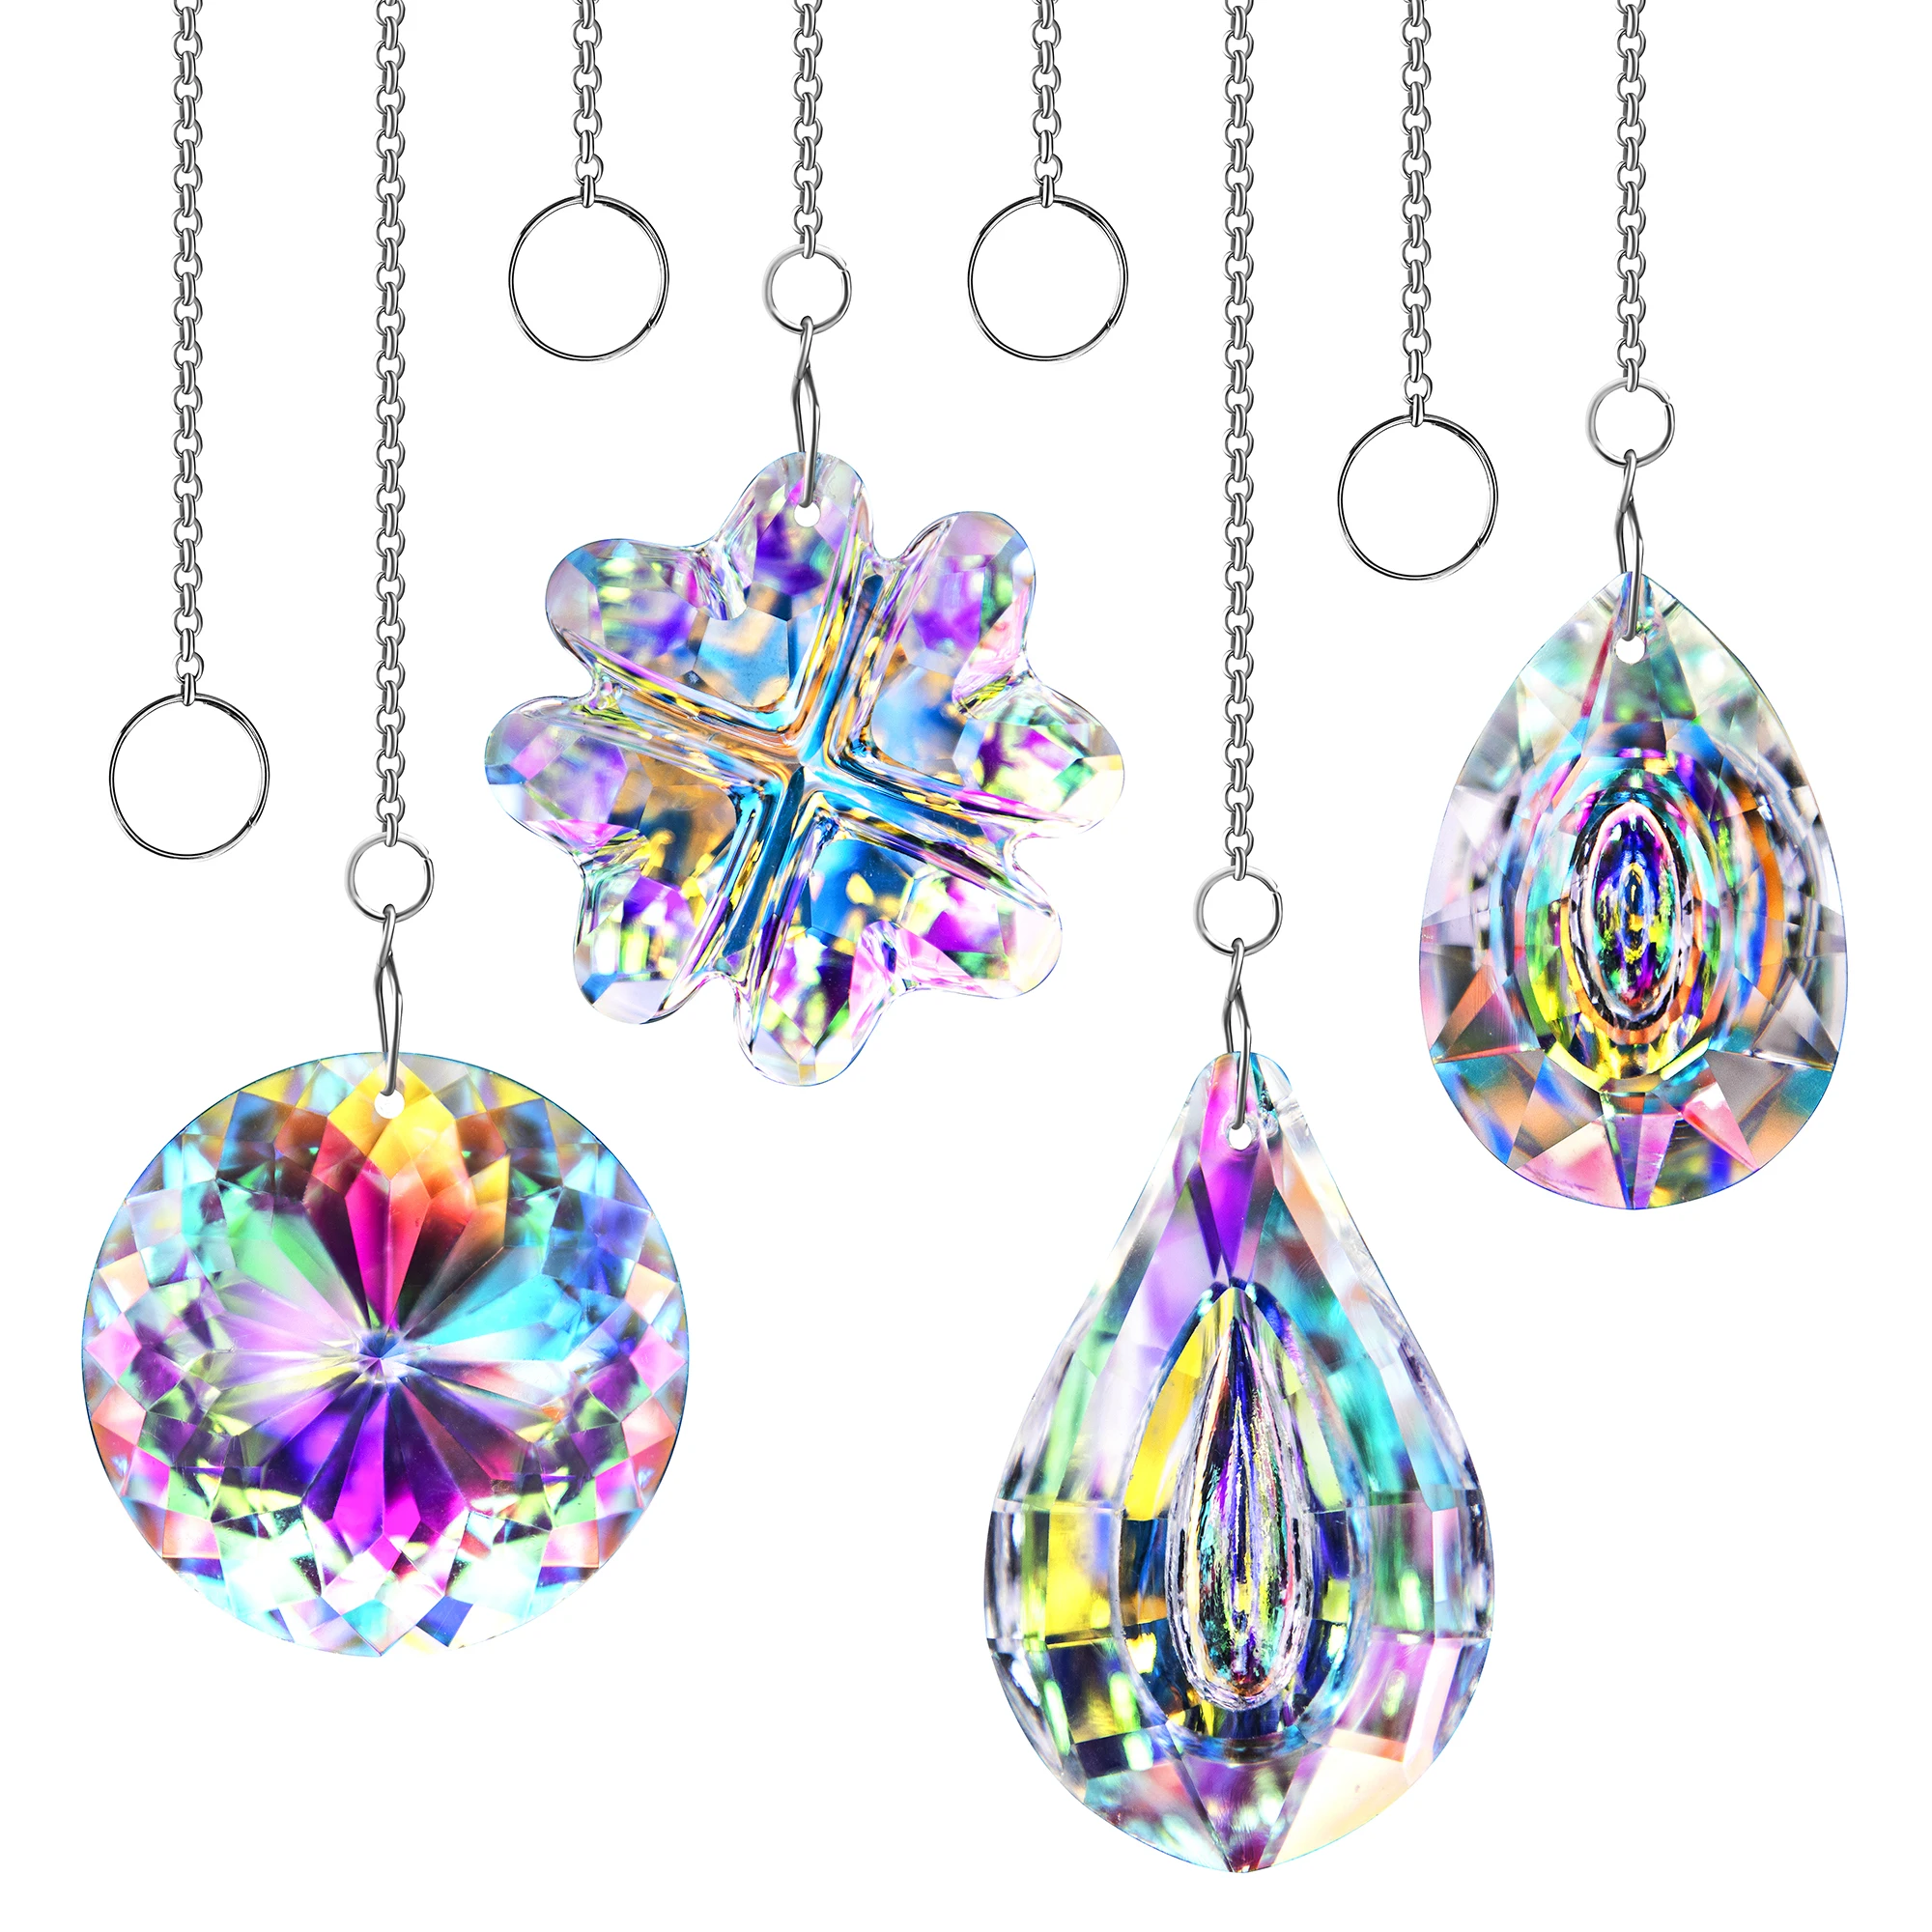 H&D Pack of 4 Colorful Crystal Suncatchers Window Hanging Rainbow Maker Prisms Bedroom Ornament Home Garden Christmas Tree Decor